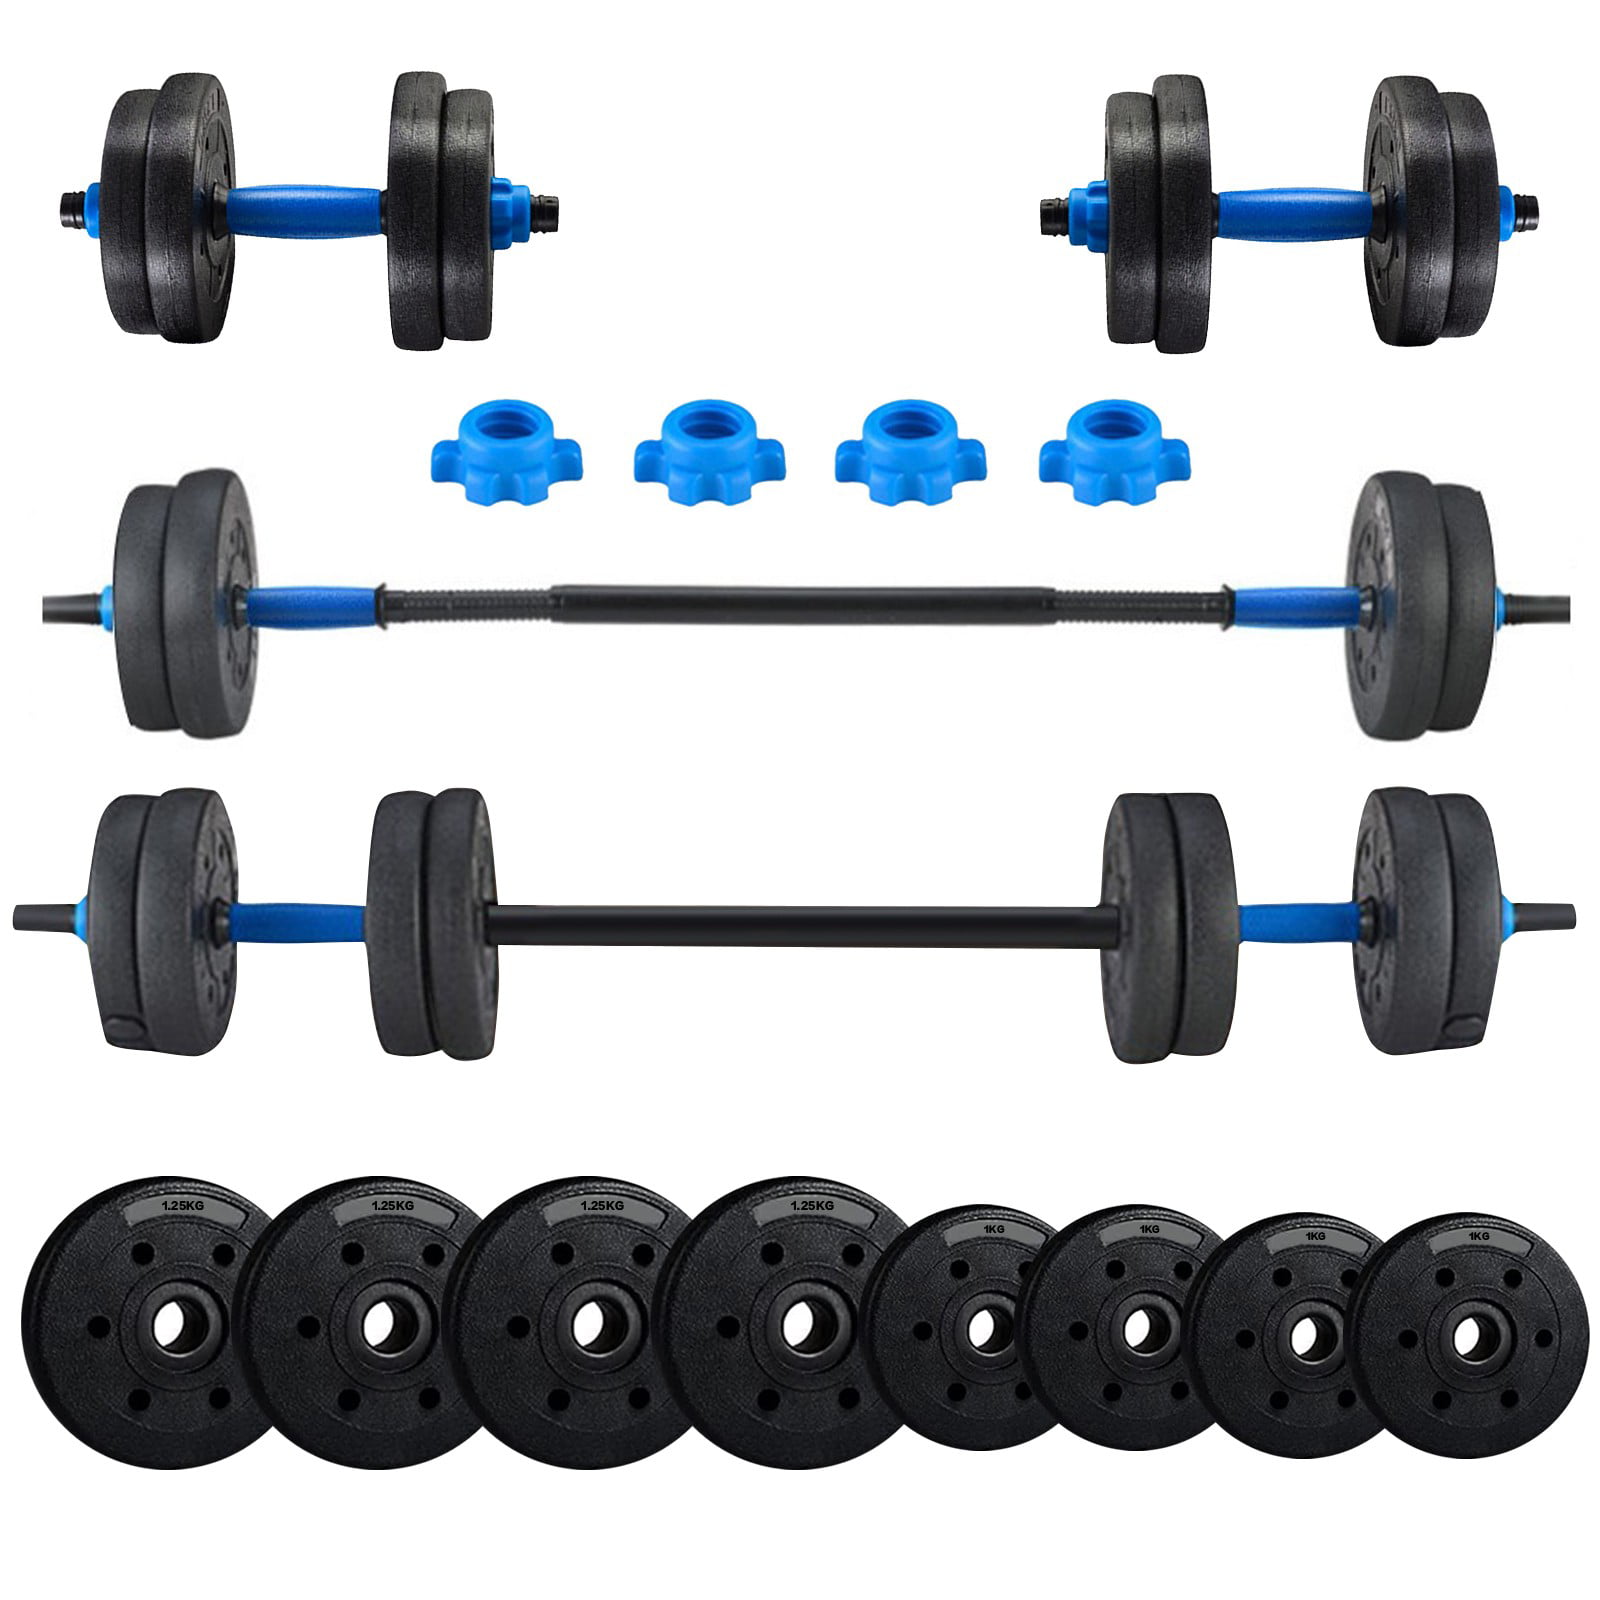 Details about   Fitness Olympic EZ Curl Bar Dumbbell Handles Spring Collars Kit Training Set New 